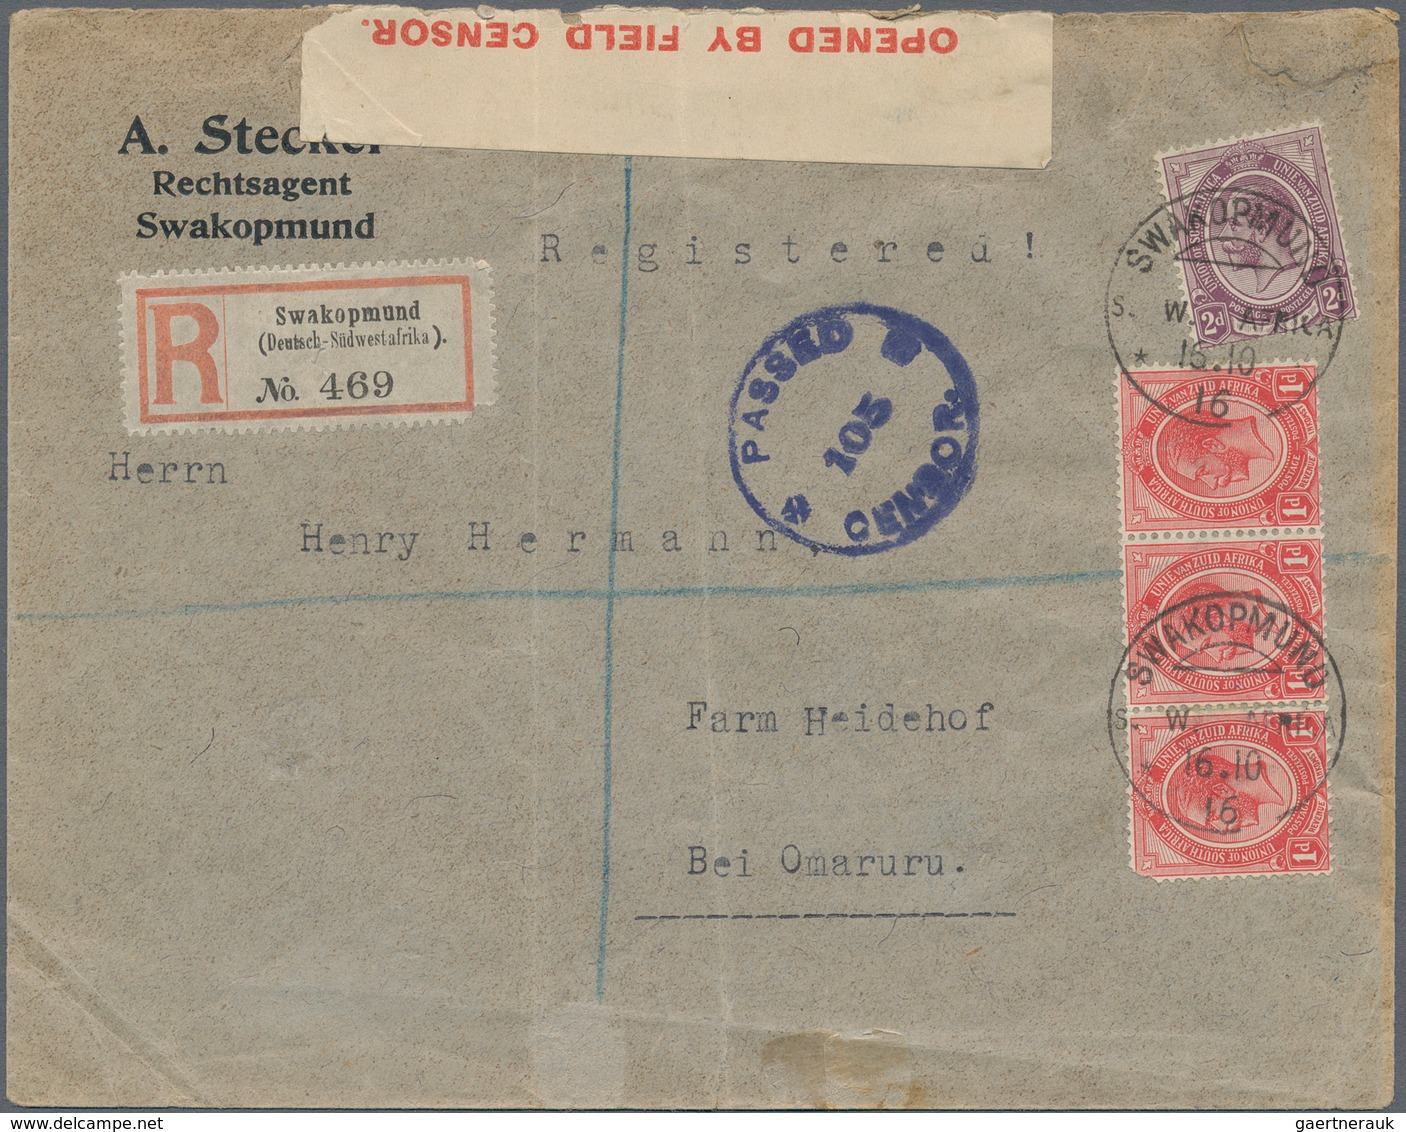 Südwestafrika: 1915/1919, 28 covers with KGV frankings, all inland mail, often German business mail